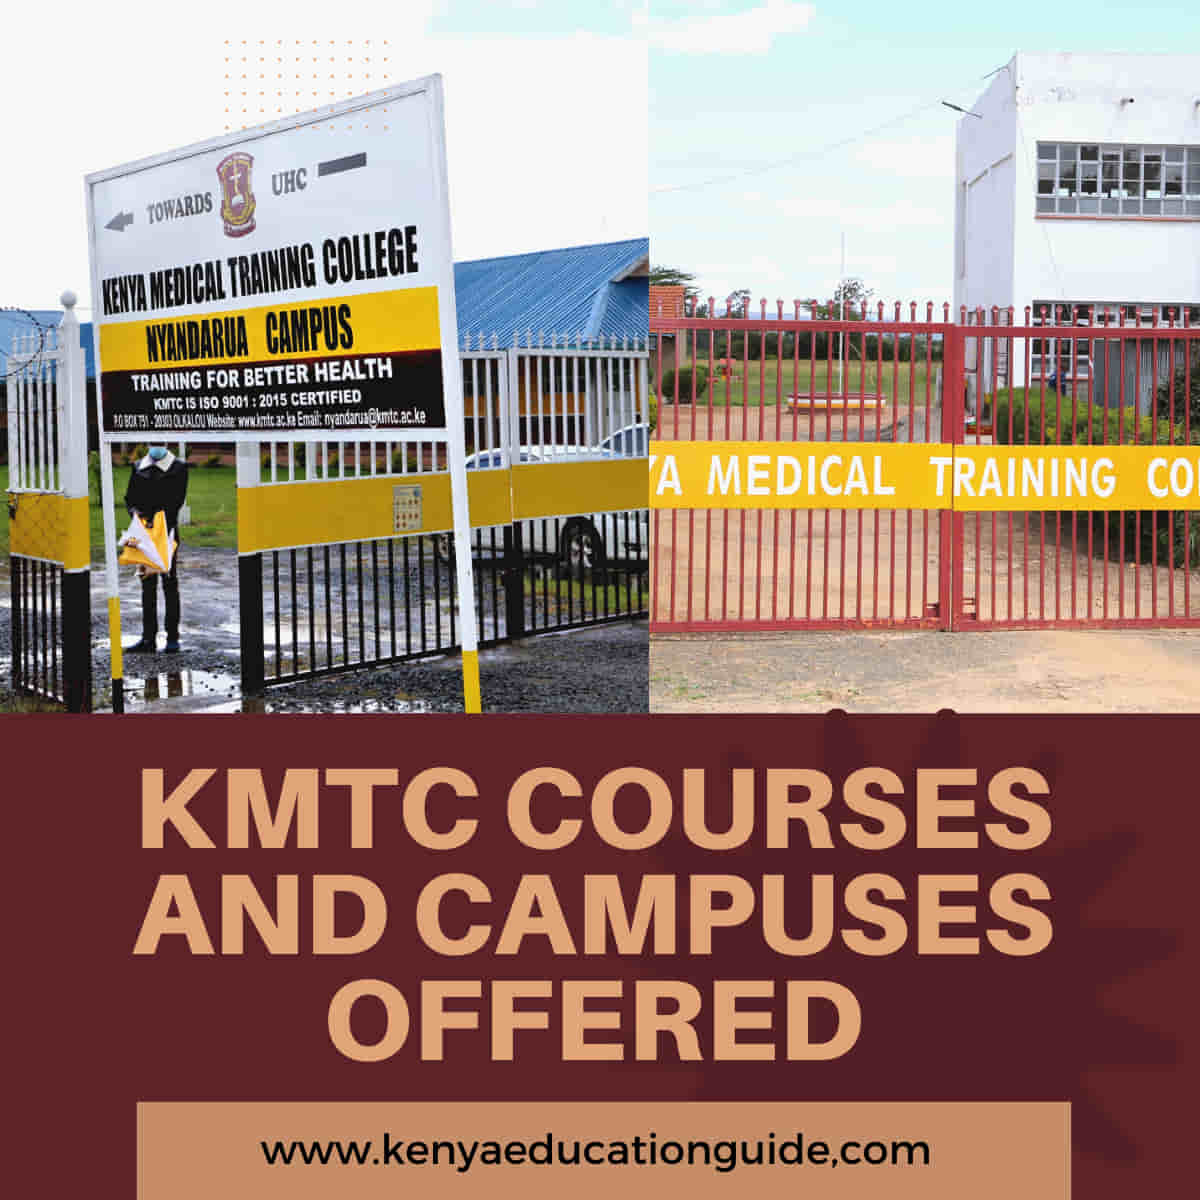 KMTC courses and campuses